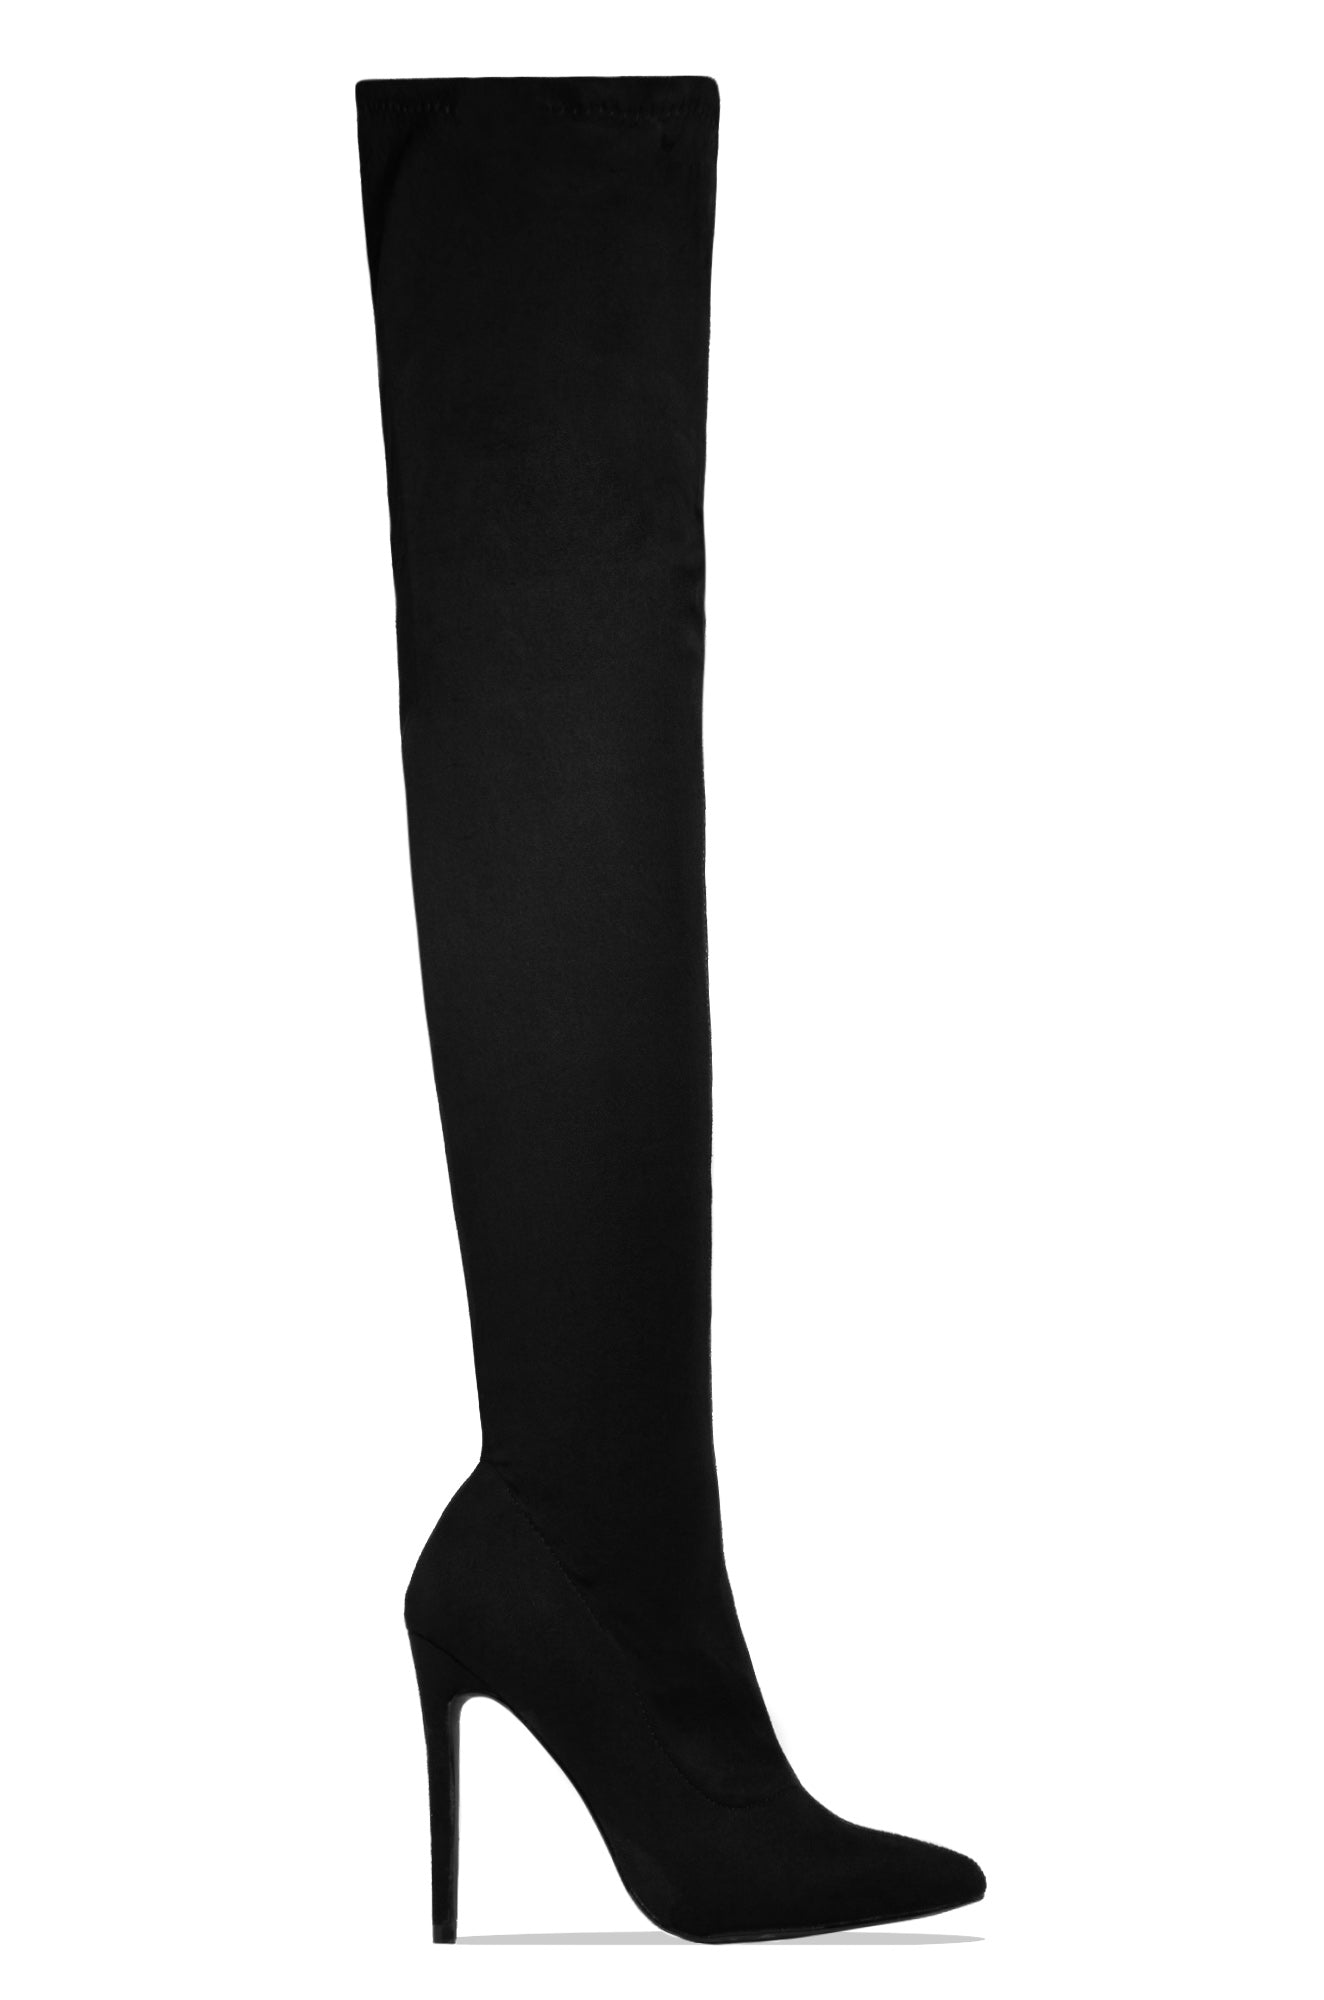 Miss Lola | Black Suede Over The Knee Boots – MISS LOLA